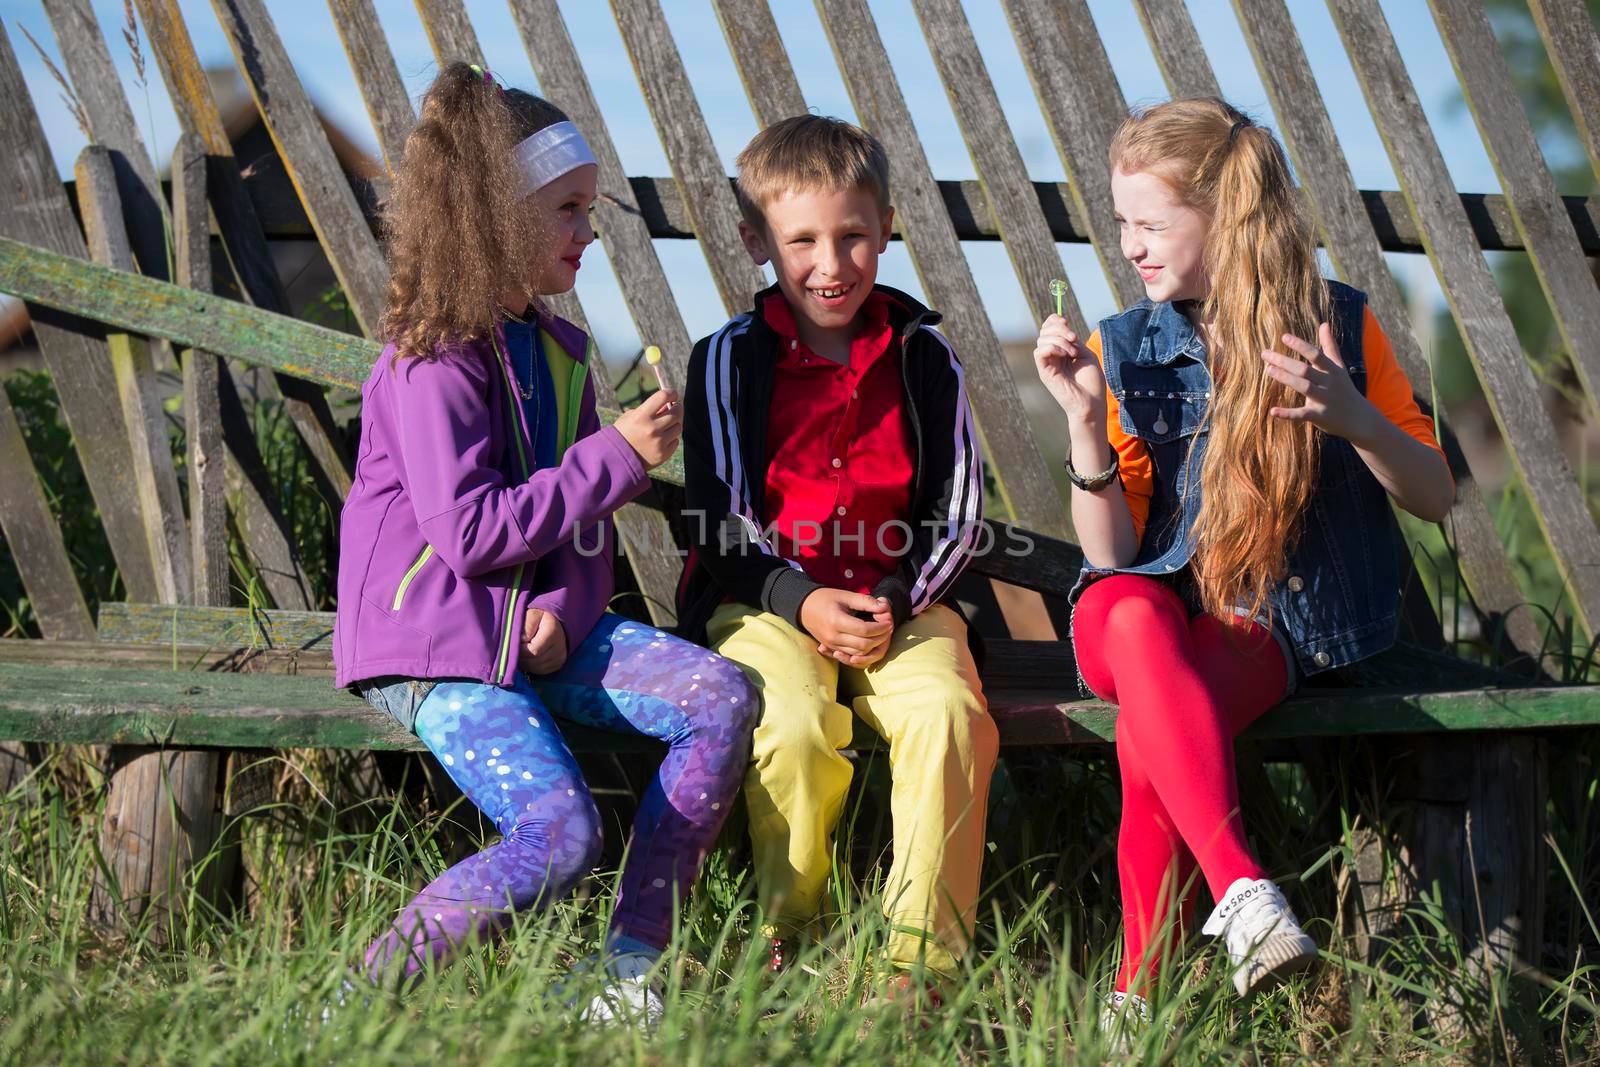 Funny little children: girls with bright makeup dressed in the style of the nineties and a boy in a red shirt are sitting on a bench by a skewed fence. Russian village children.